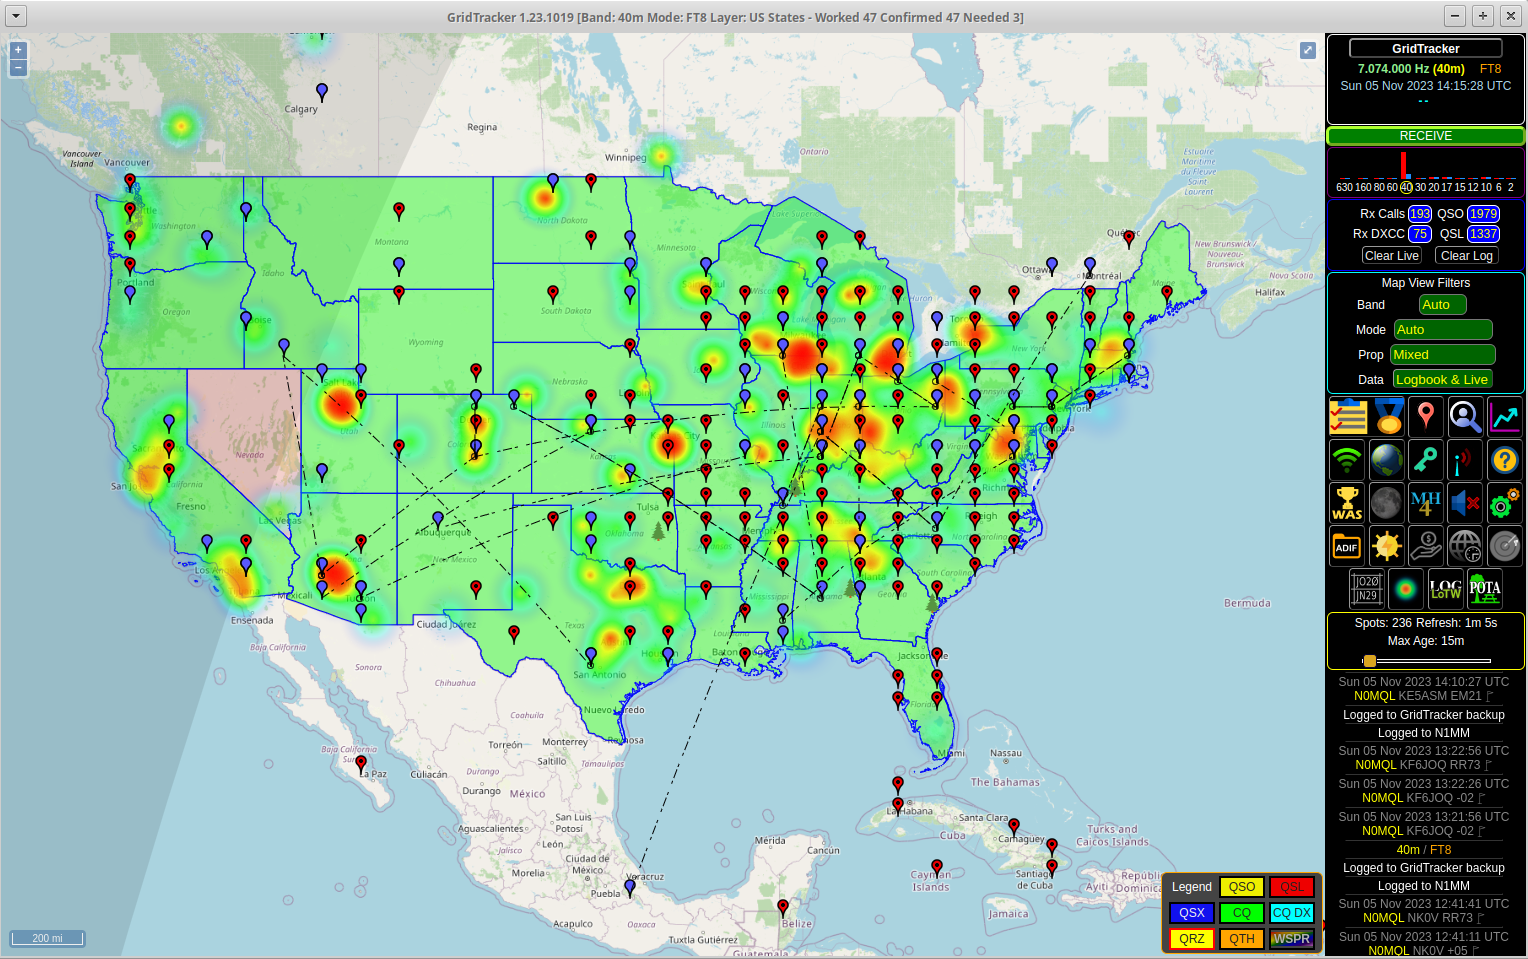 Screenshot of GridTracker showing that on 40m the only state I'm missing (in the lower 48) is Nevada.